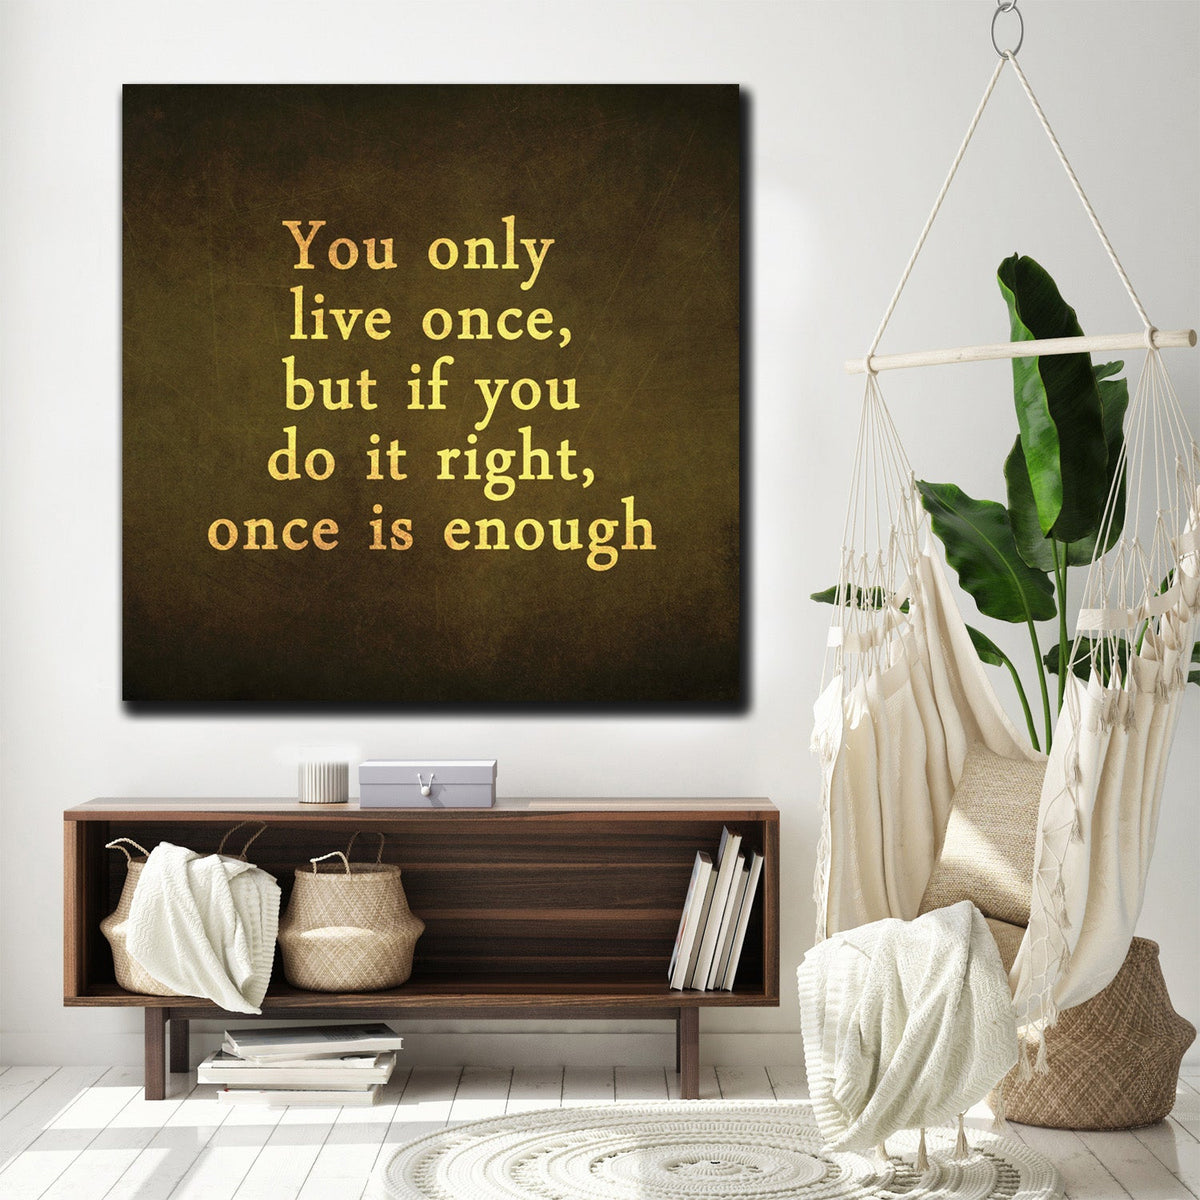 https://cdn.shopify.com/s/files/1/0387/9986/8044/products/YouOnlyLiveOnceCanvasArtprintStretched-3.jpg